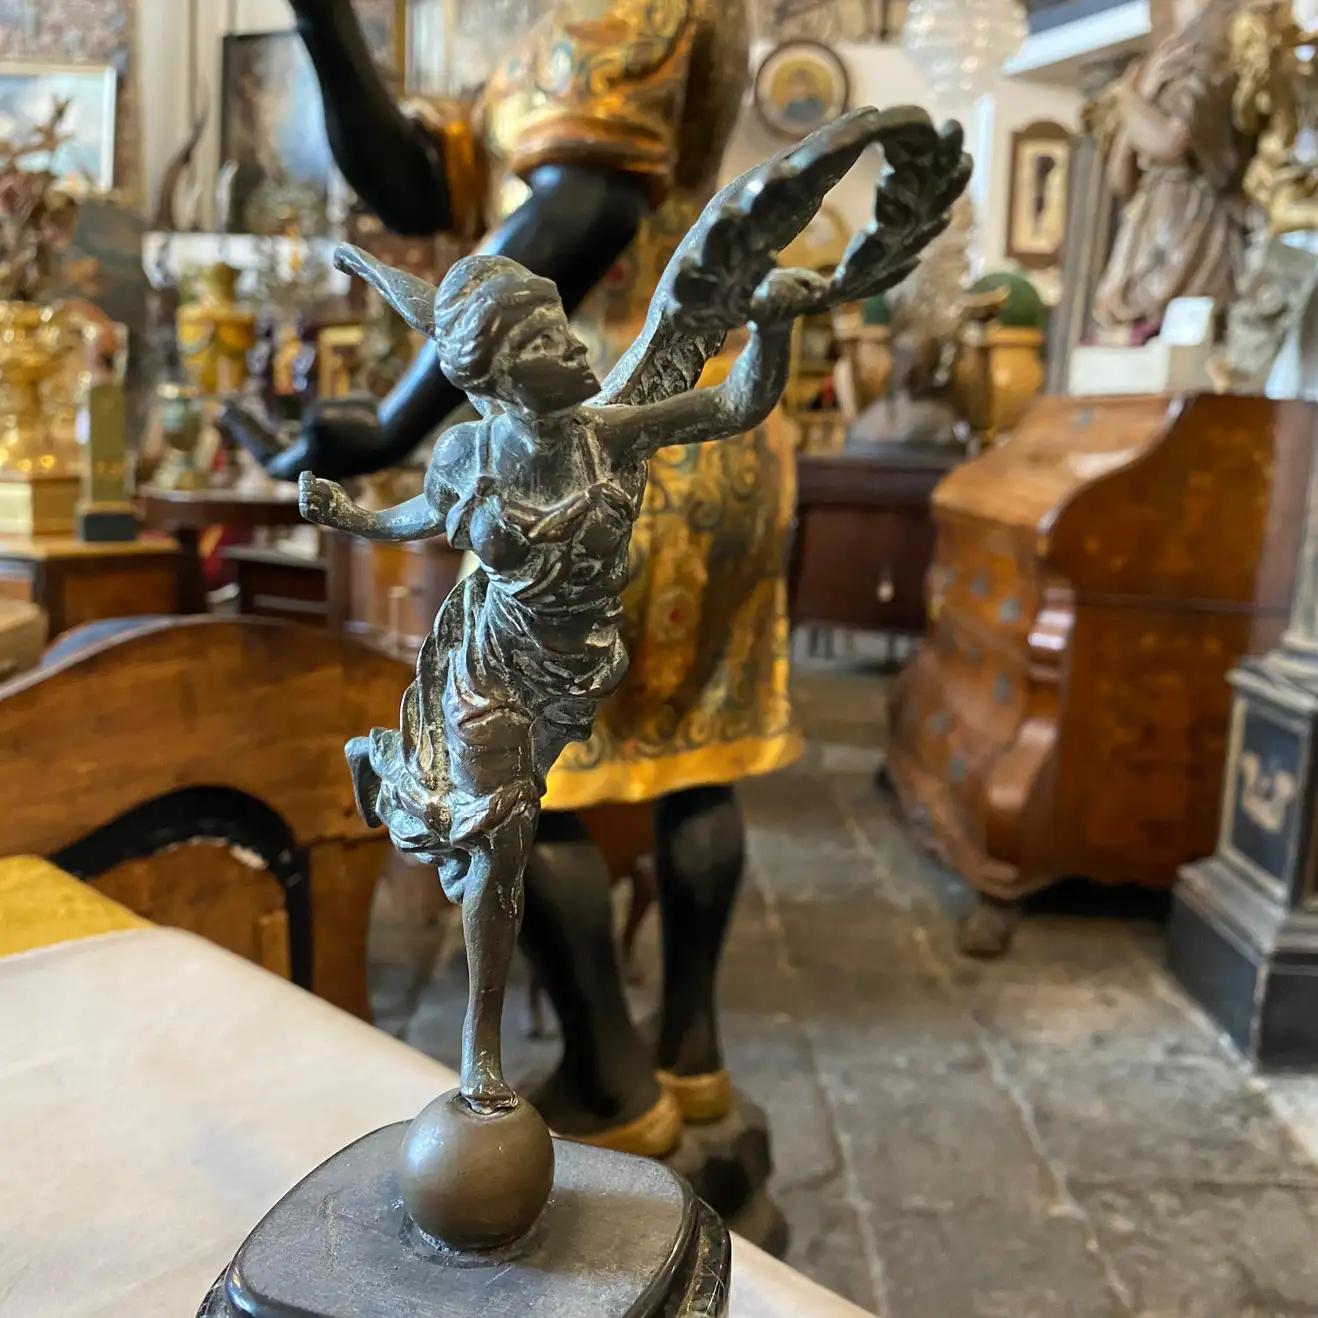 An Art Deco bronze statue made in Italy in the Thirties, very good conditions overall, original polycrome marble base and bronze are in original patina.